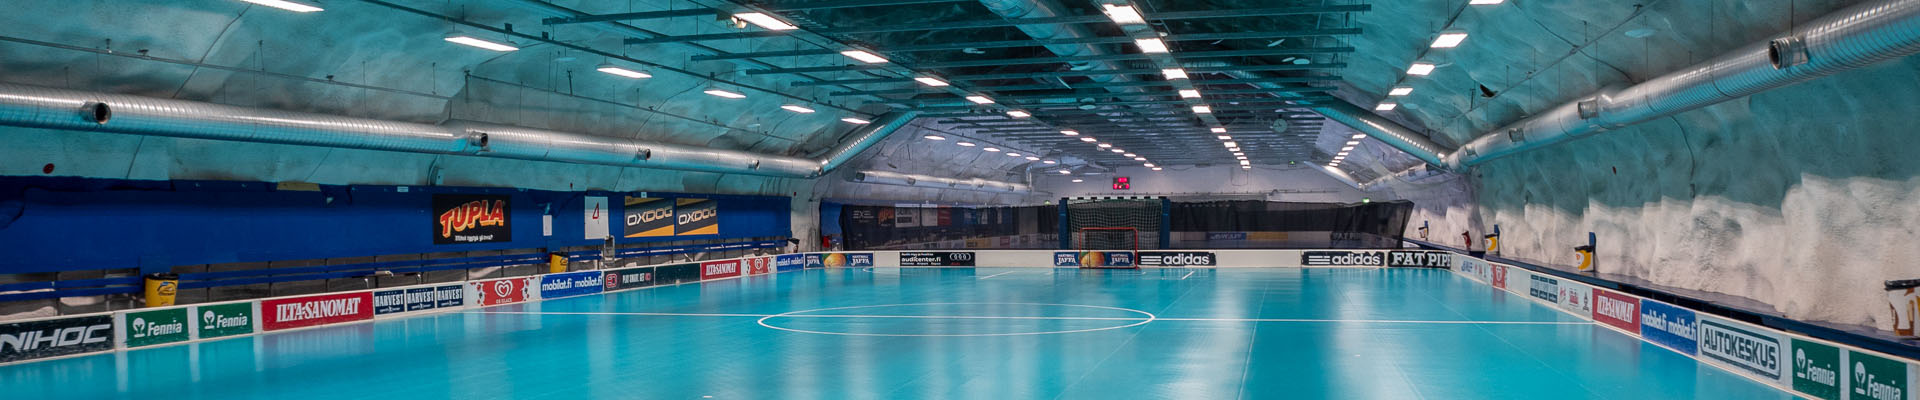 Defence shelter, used as a floorball field.